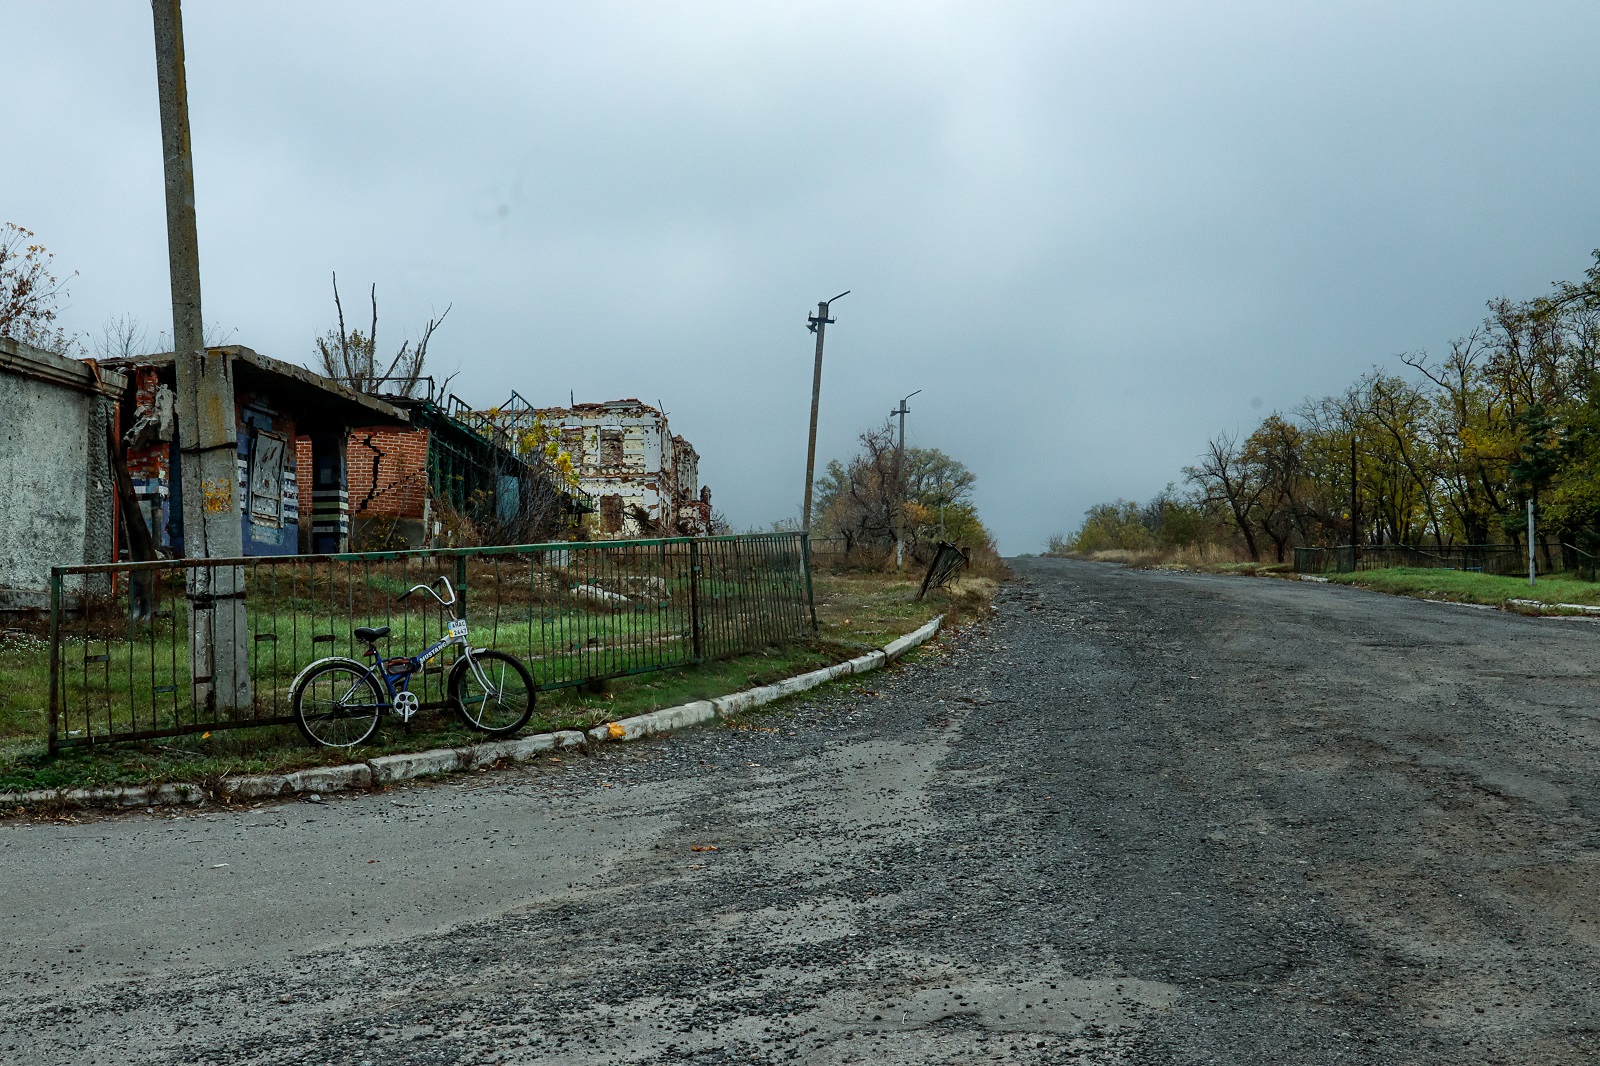 A bike attached to a fence in a street of Ukraine. Behind the fence, houses damaged by explosive weapons